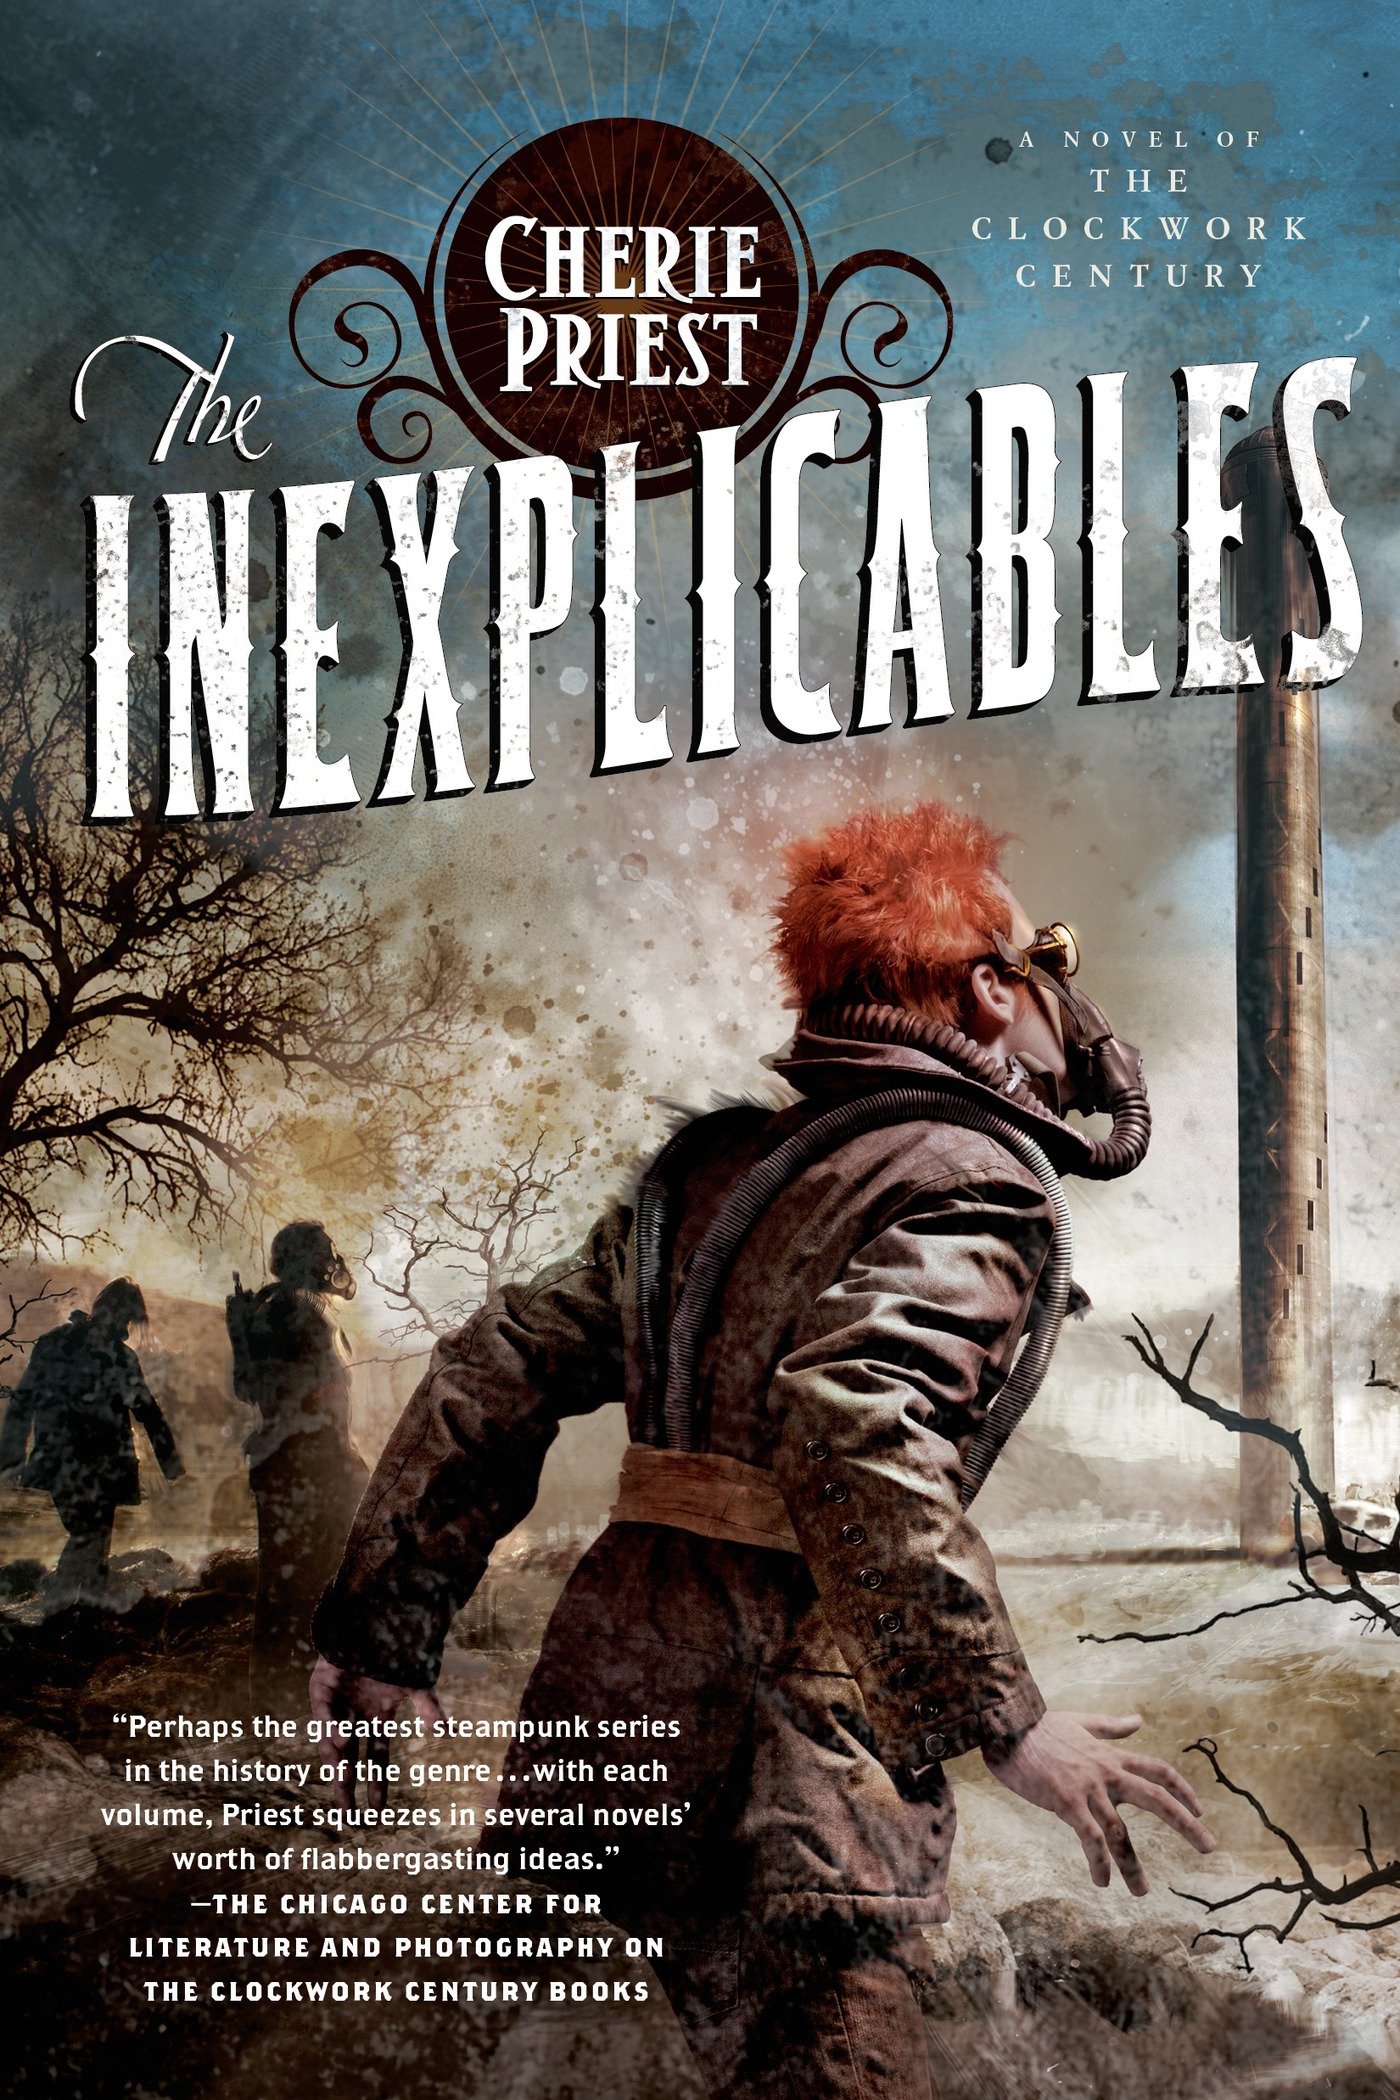 The Inexplicables : A Novel of the Clockwork Century by Cherie Priest